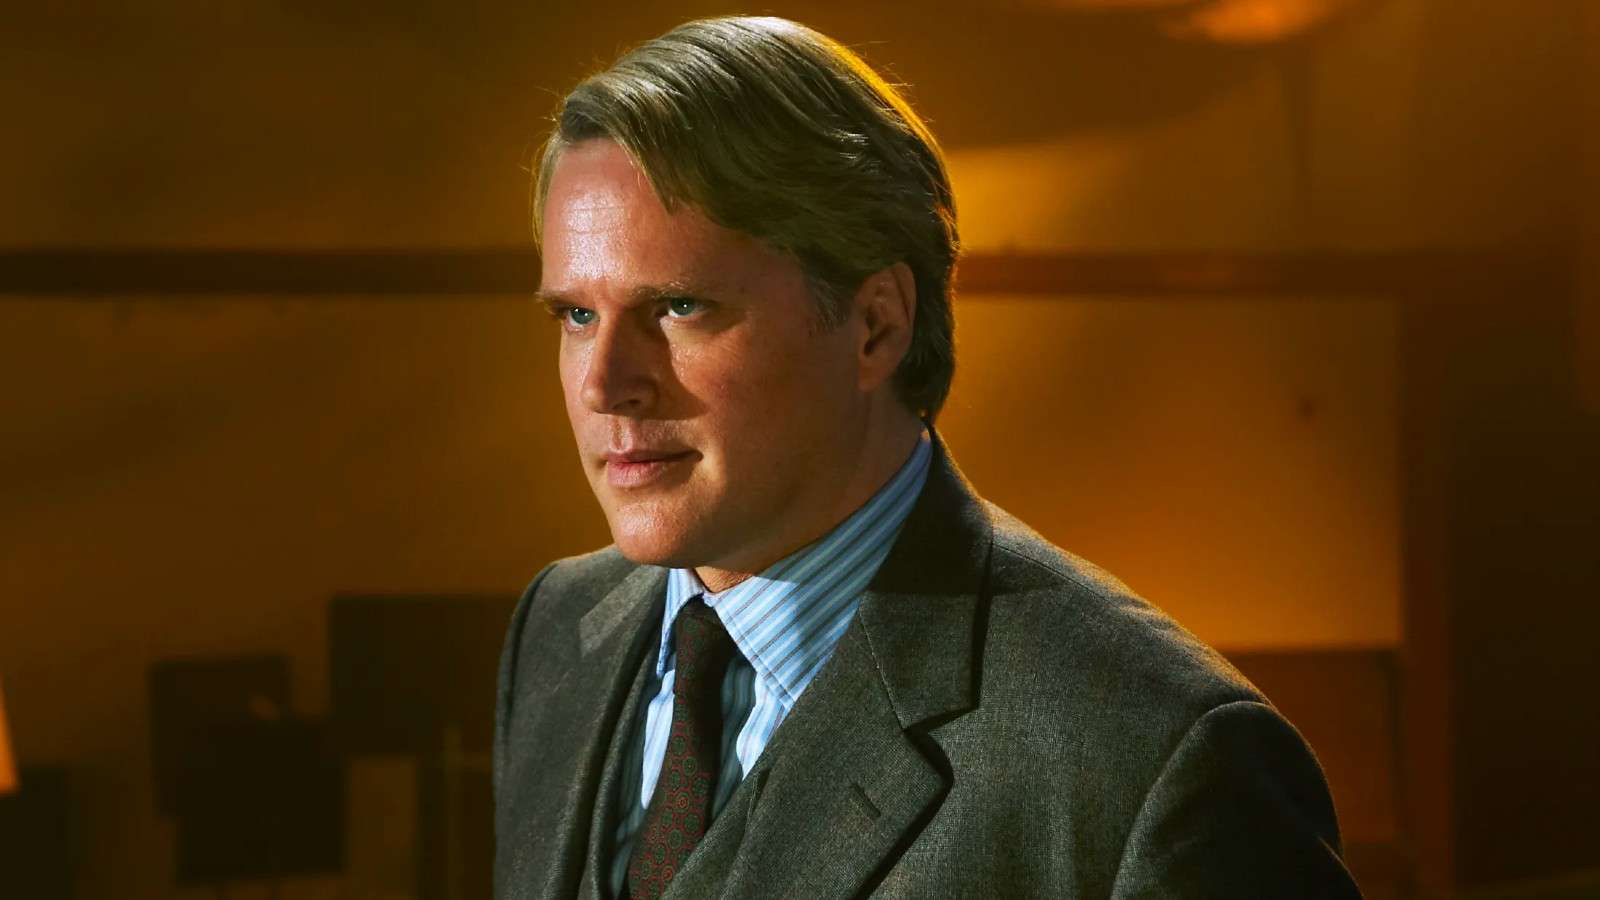 Cary Elwes as Dr Lawrence Gordon in Saw 3D